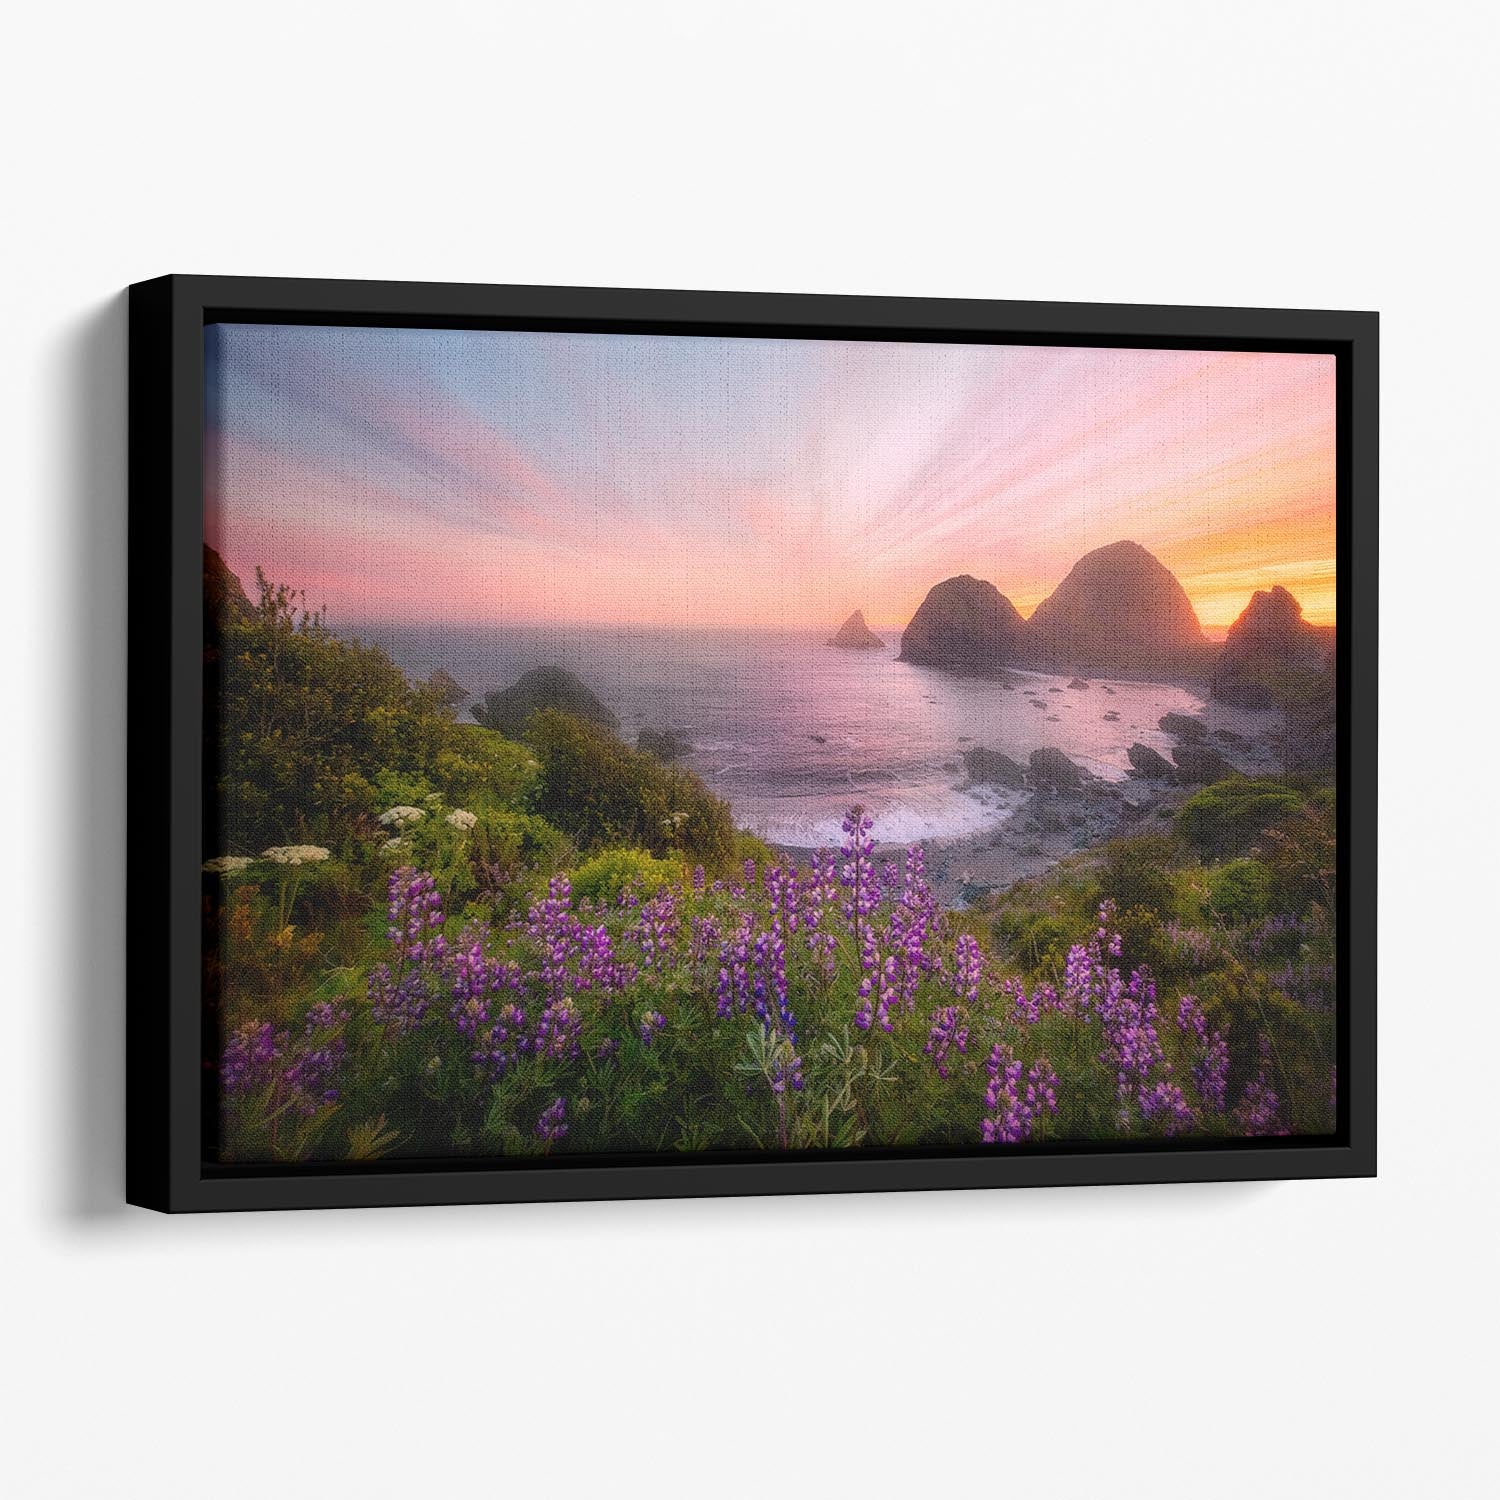 Sister Rocks with Lupin Blooms Floating Framed Canvas - Canvas Art Rocks - 1